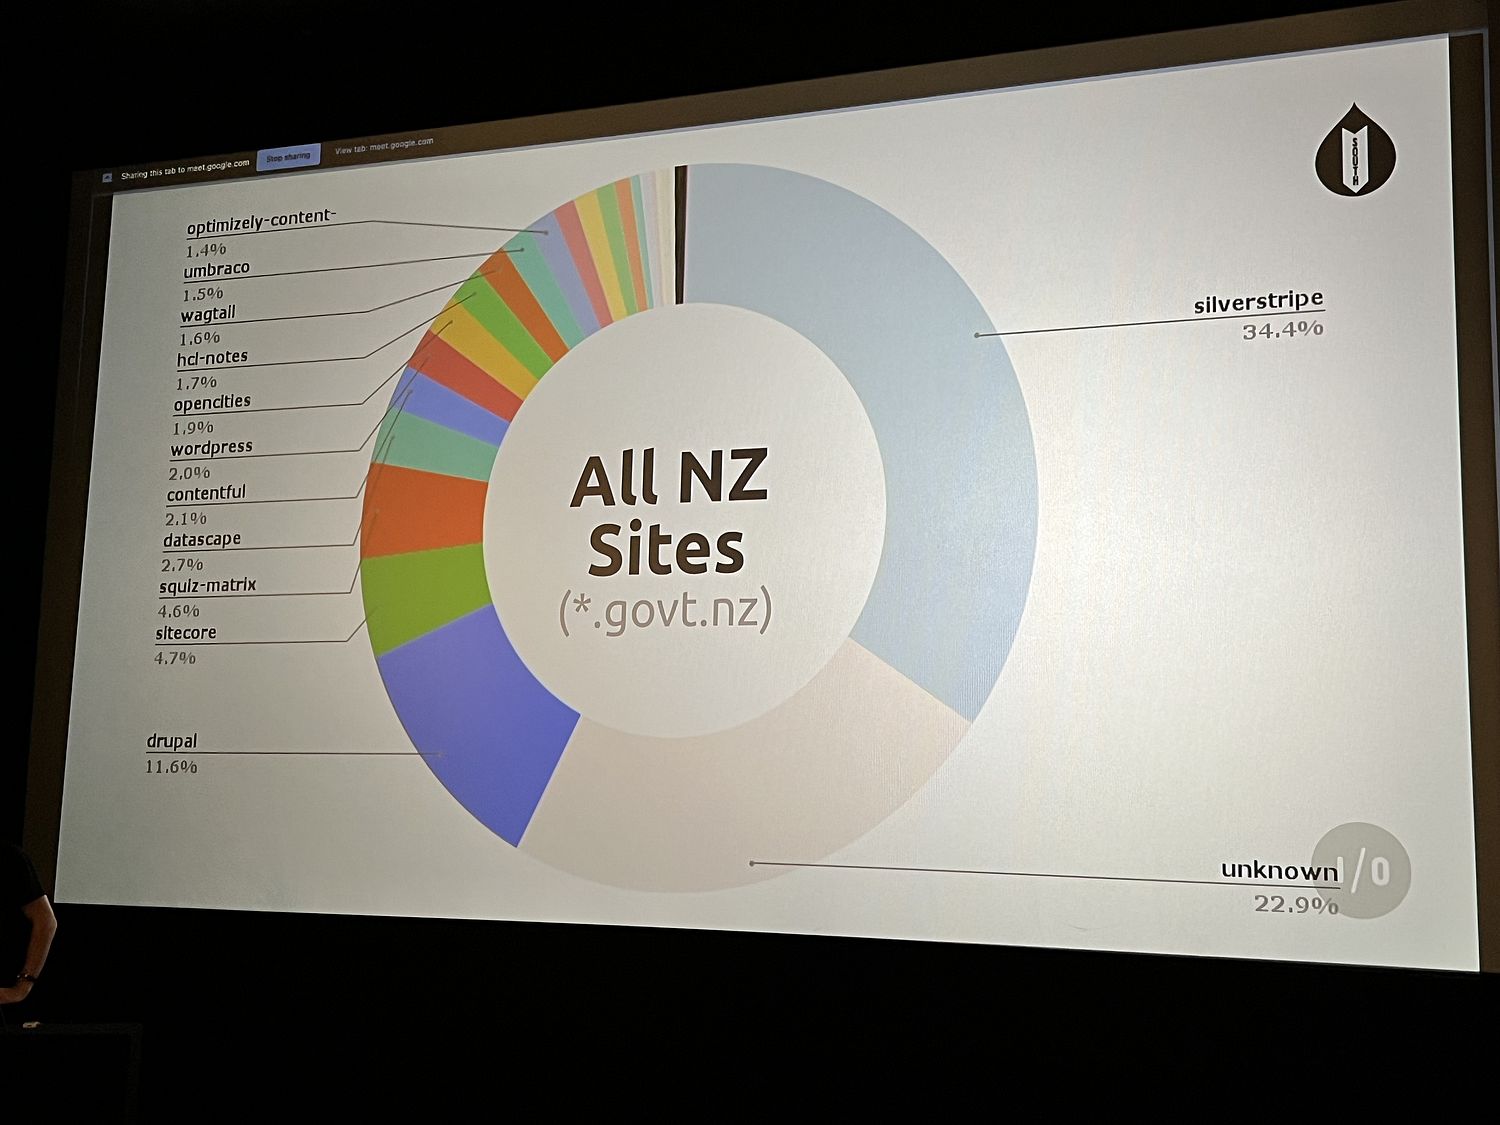 A pie chart showing the distribution of CMS platforms.